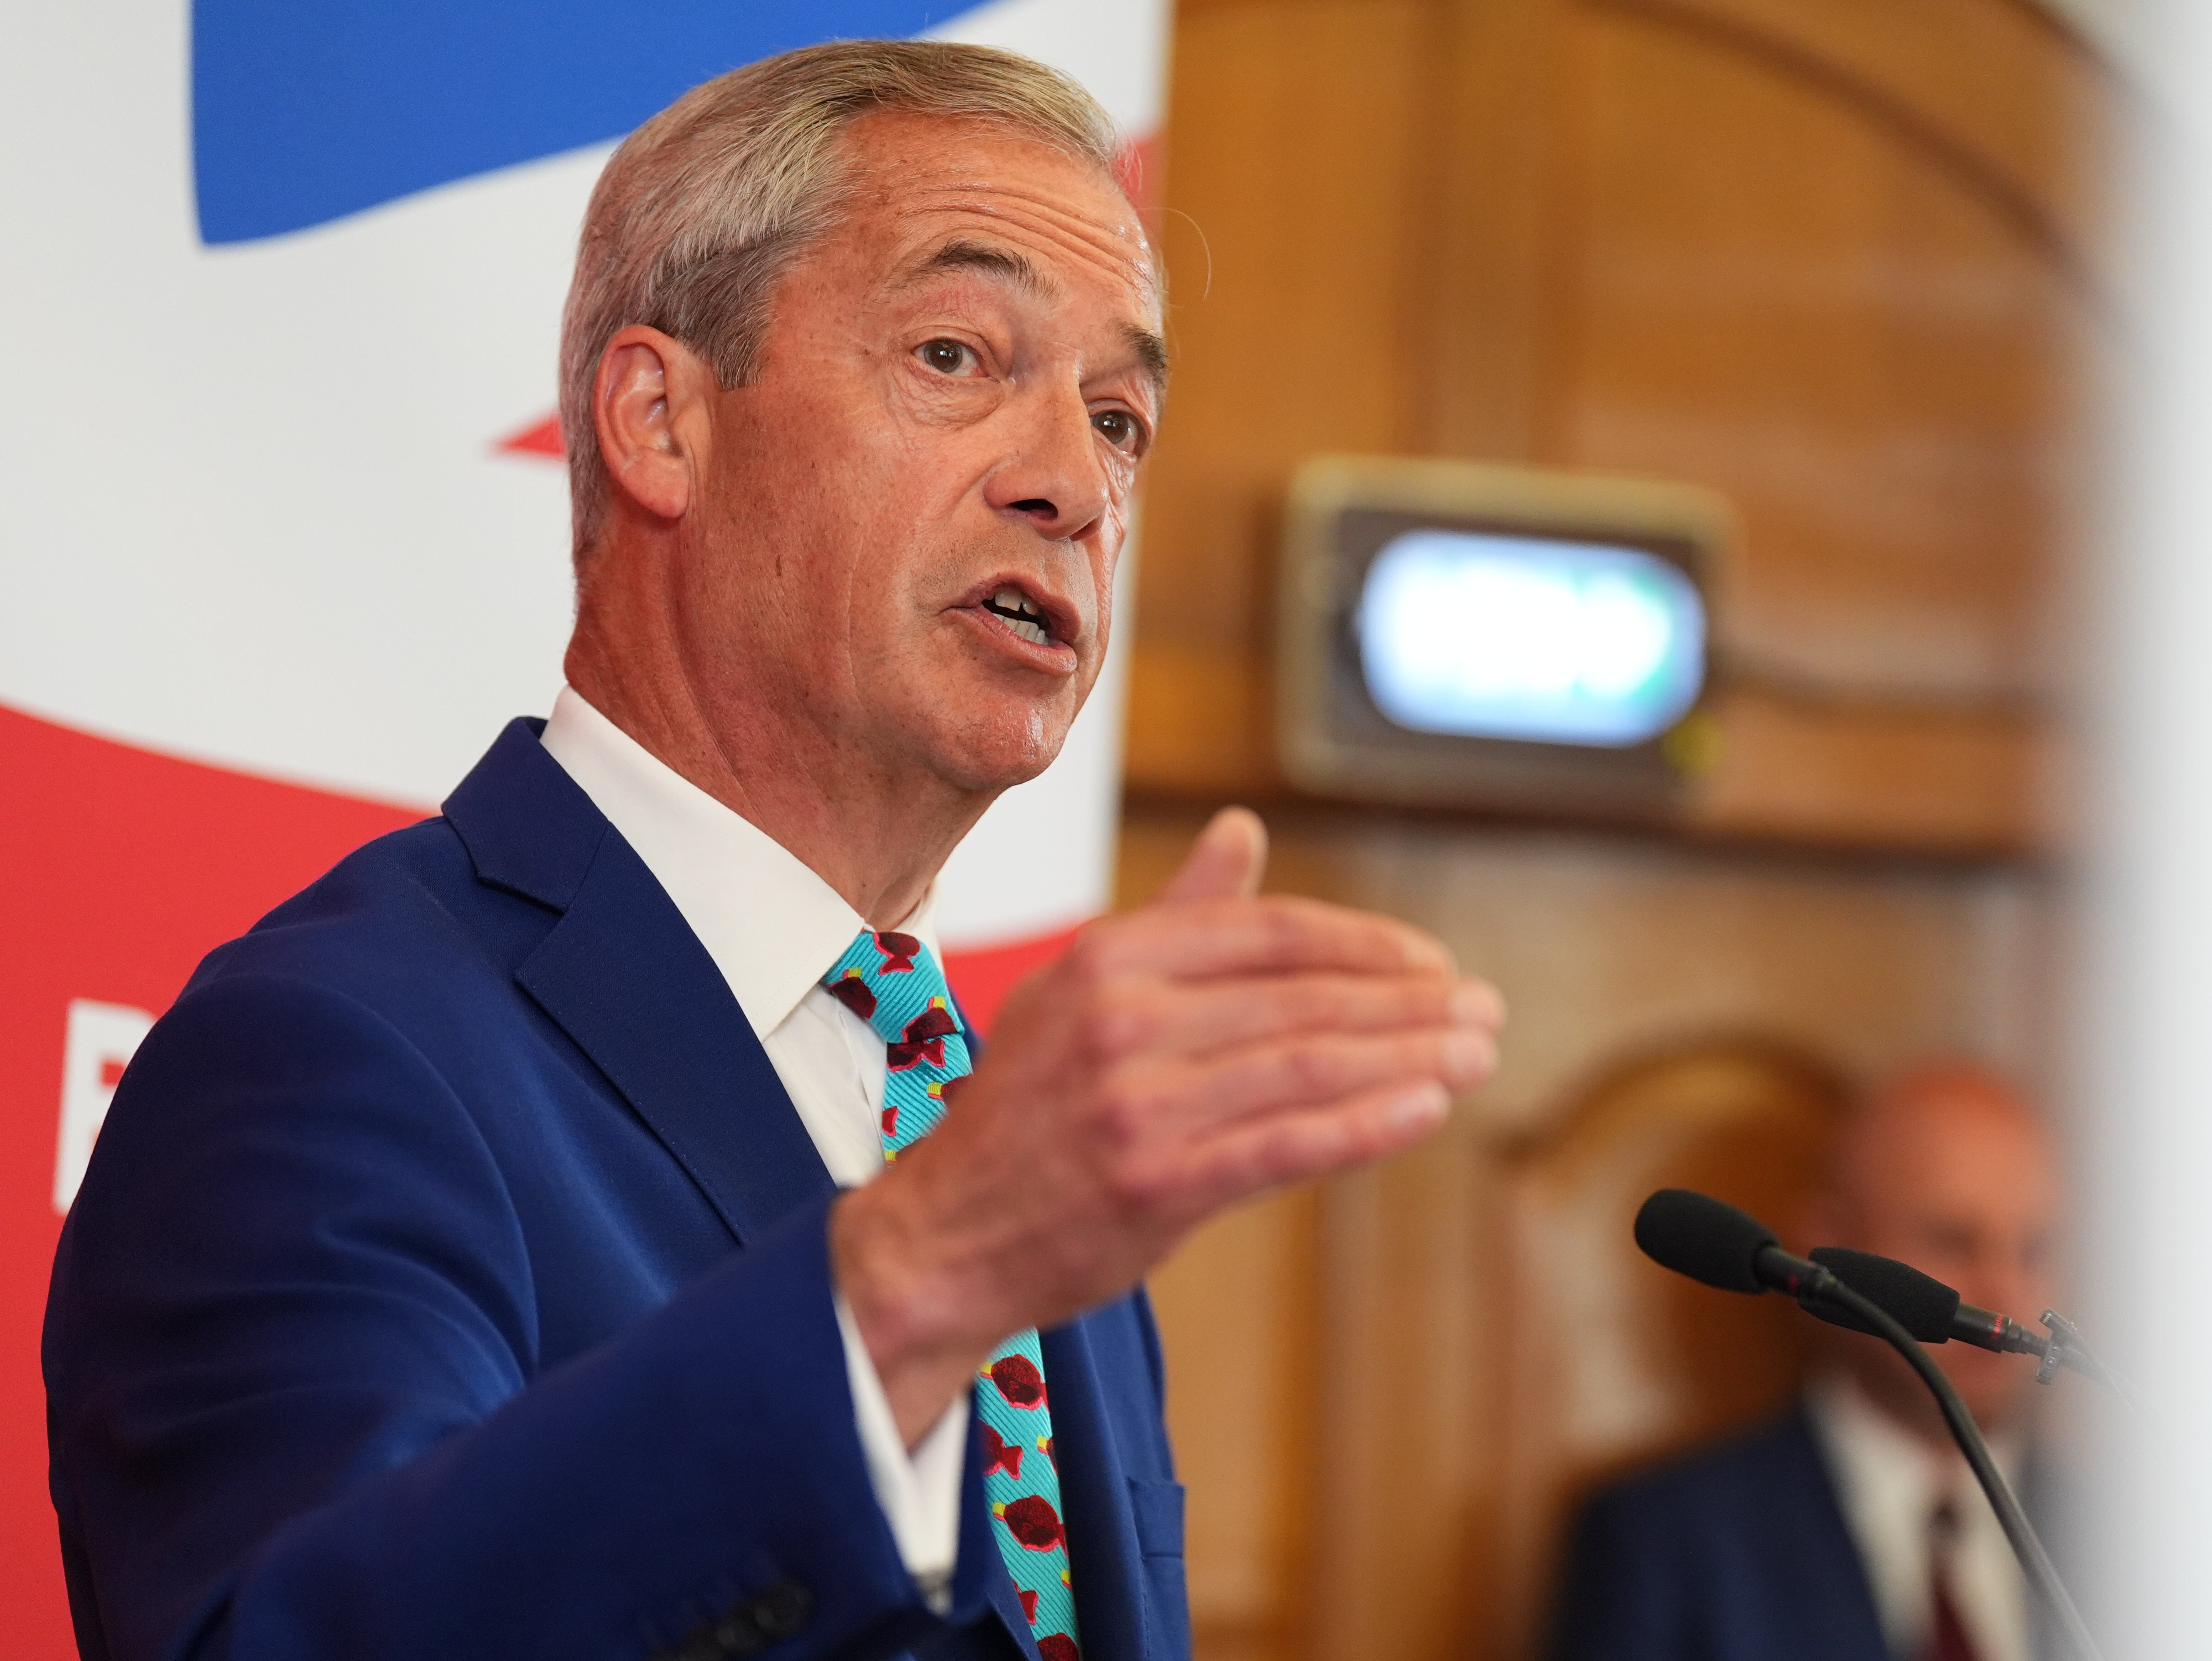 Leader of Reform UK Nigel Farage at an announcement of the party's economic policy during a press conference at Church House in London